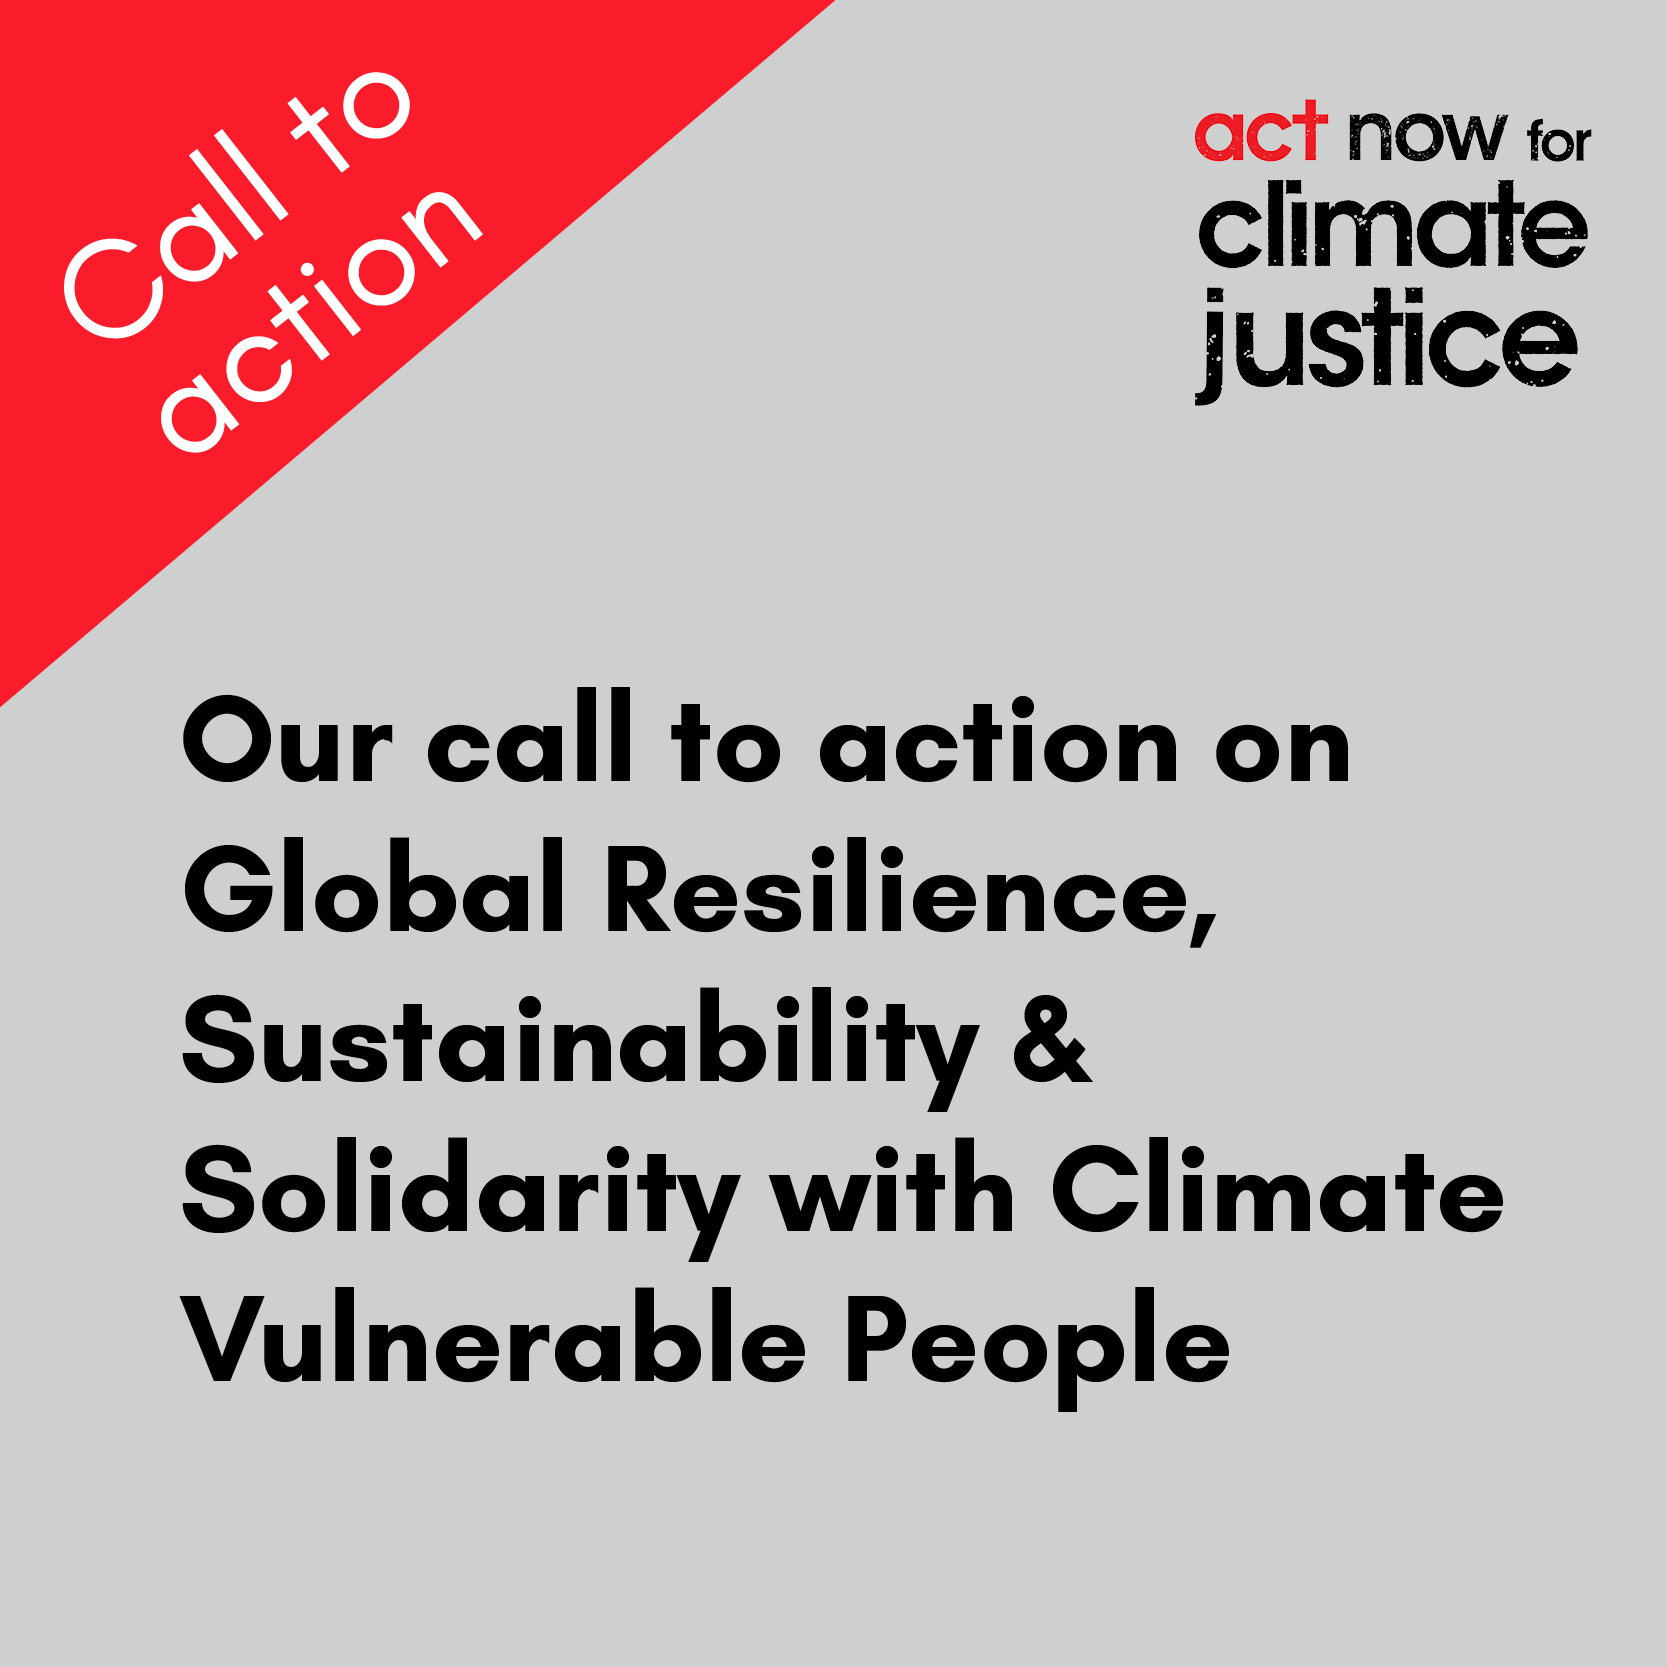 Our call to action on Global Resilience, Sustainability & Solidarity with Climate Vulnerable People